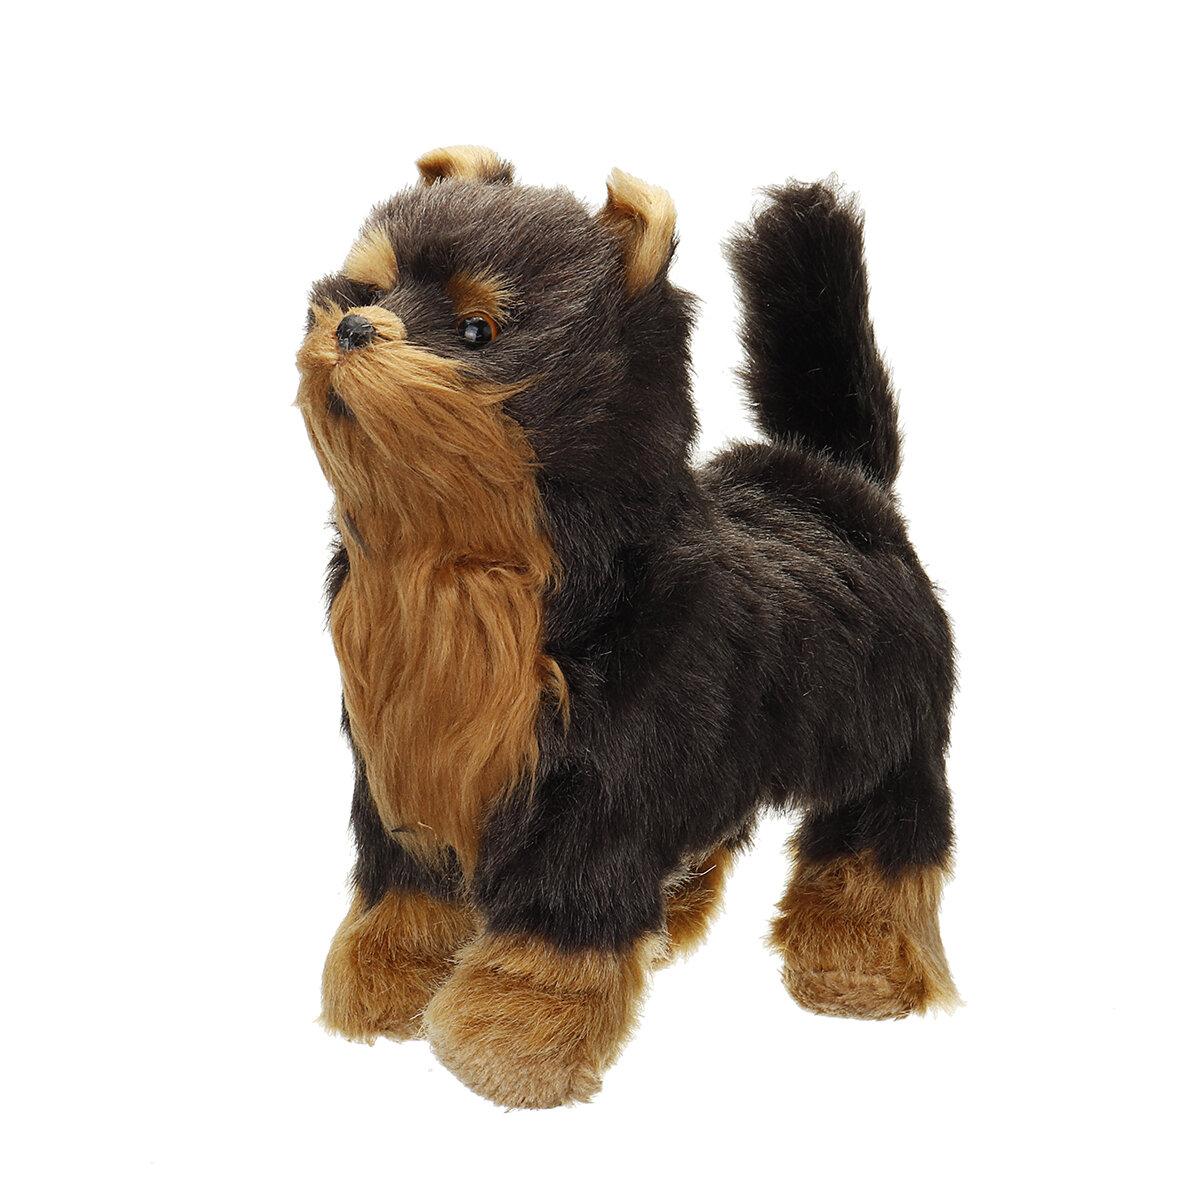 

Electric Walk Sing Wag Realistic Simulation Dog Lifelike Animal Dolls Toy for Home Decoration Collection Kids Gift